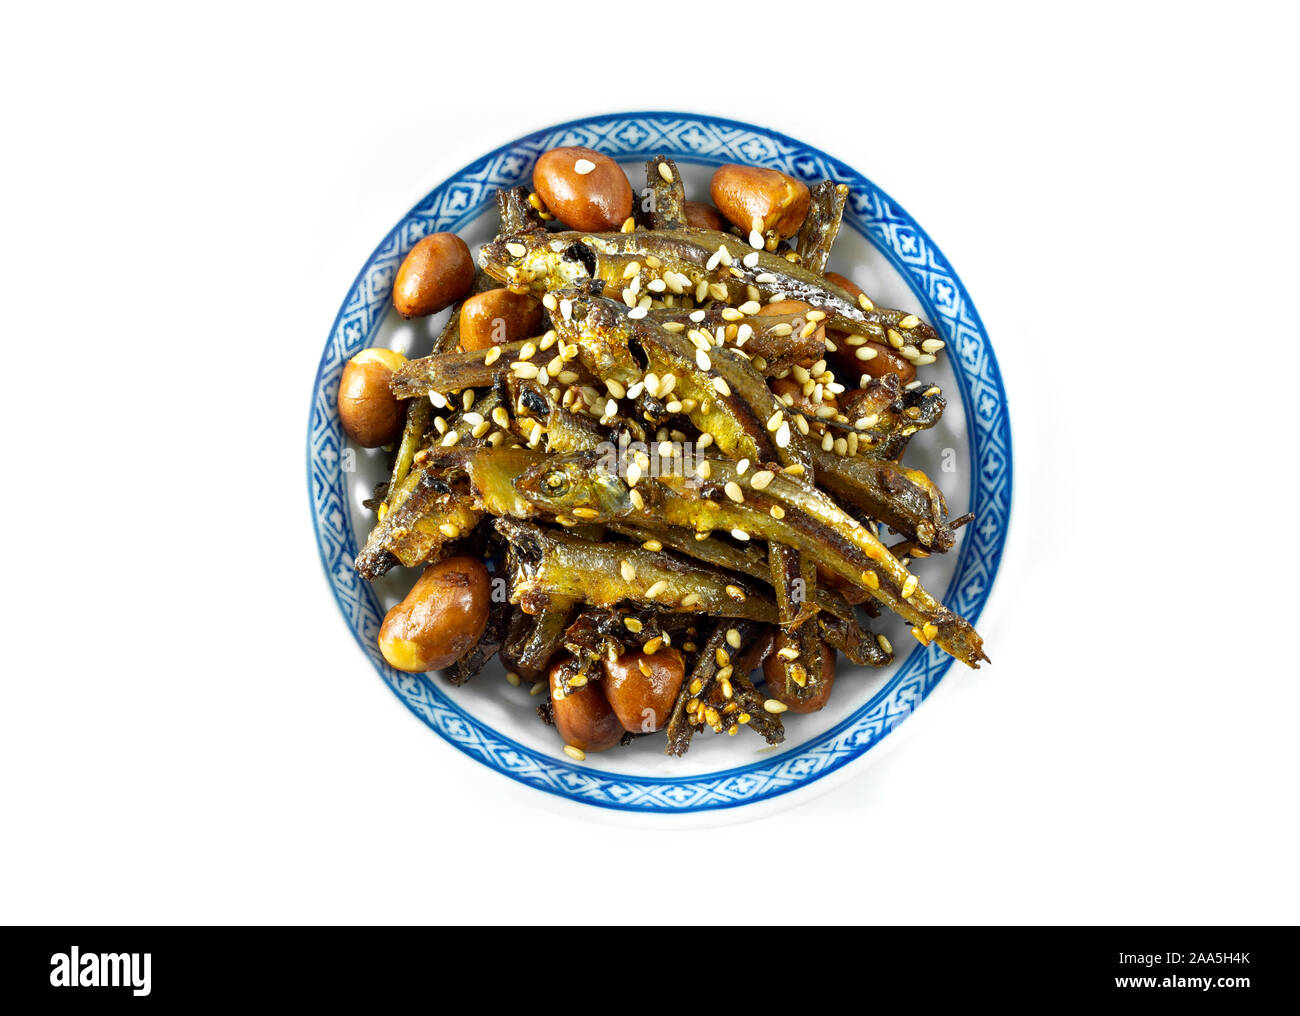 Tazukuri, candied sardines in a dish. Dried sardines lightly coated with honey, roasted sesame and peanuts. Stock Photo